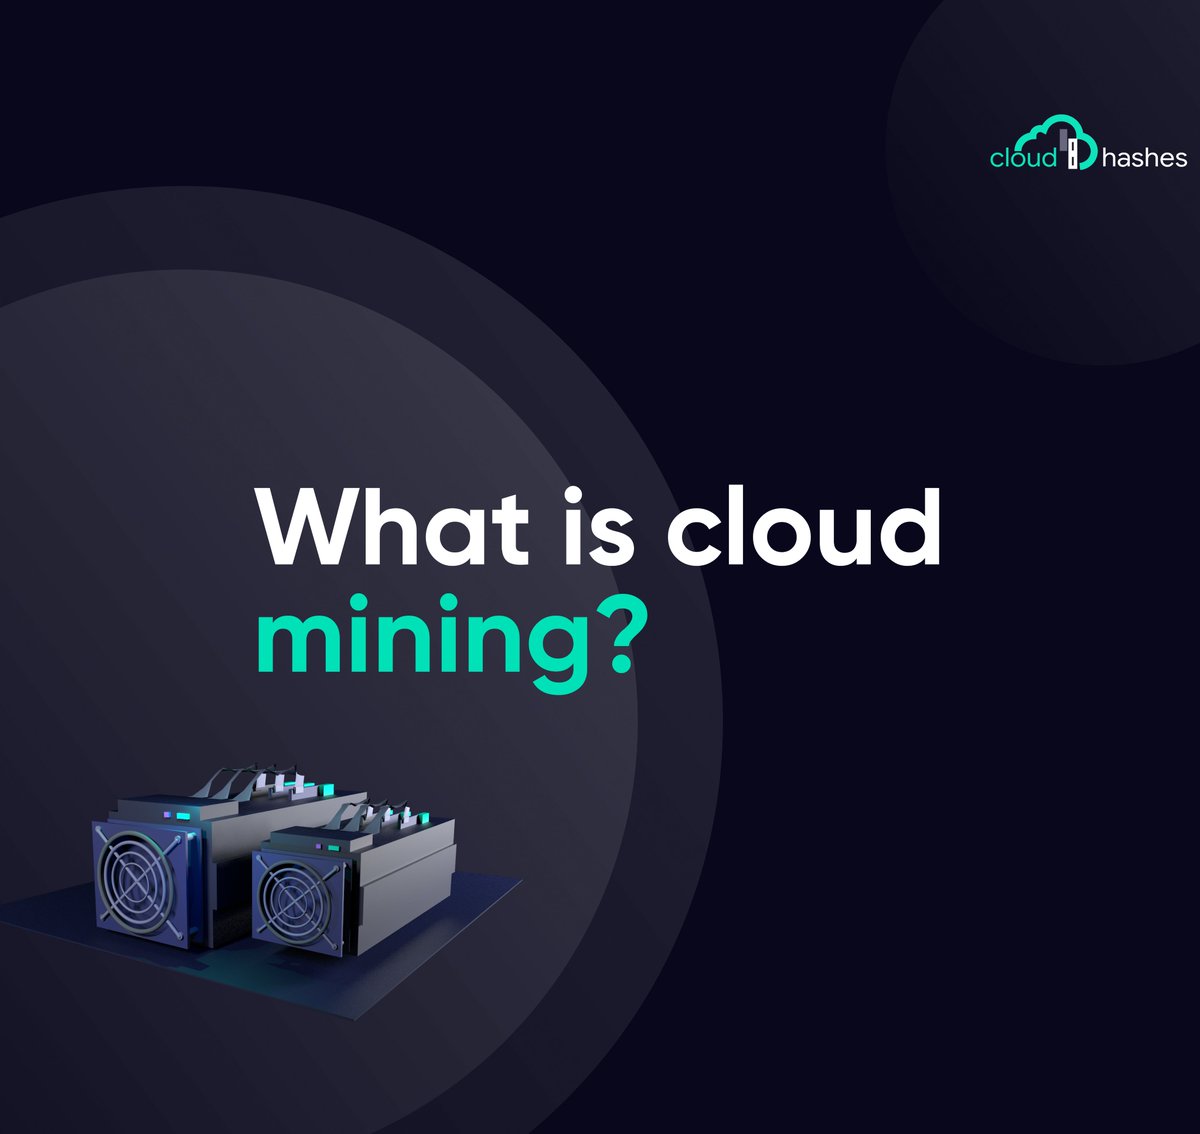 Cloud mining☁️ refers to the practice of remotely mining cryptocurrencies using shared computing power and resources provided by a third-party service provider.

Try cloud mining. Follow the link.

#cloudmining #cloudhashes